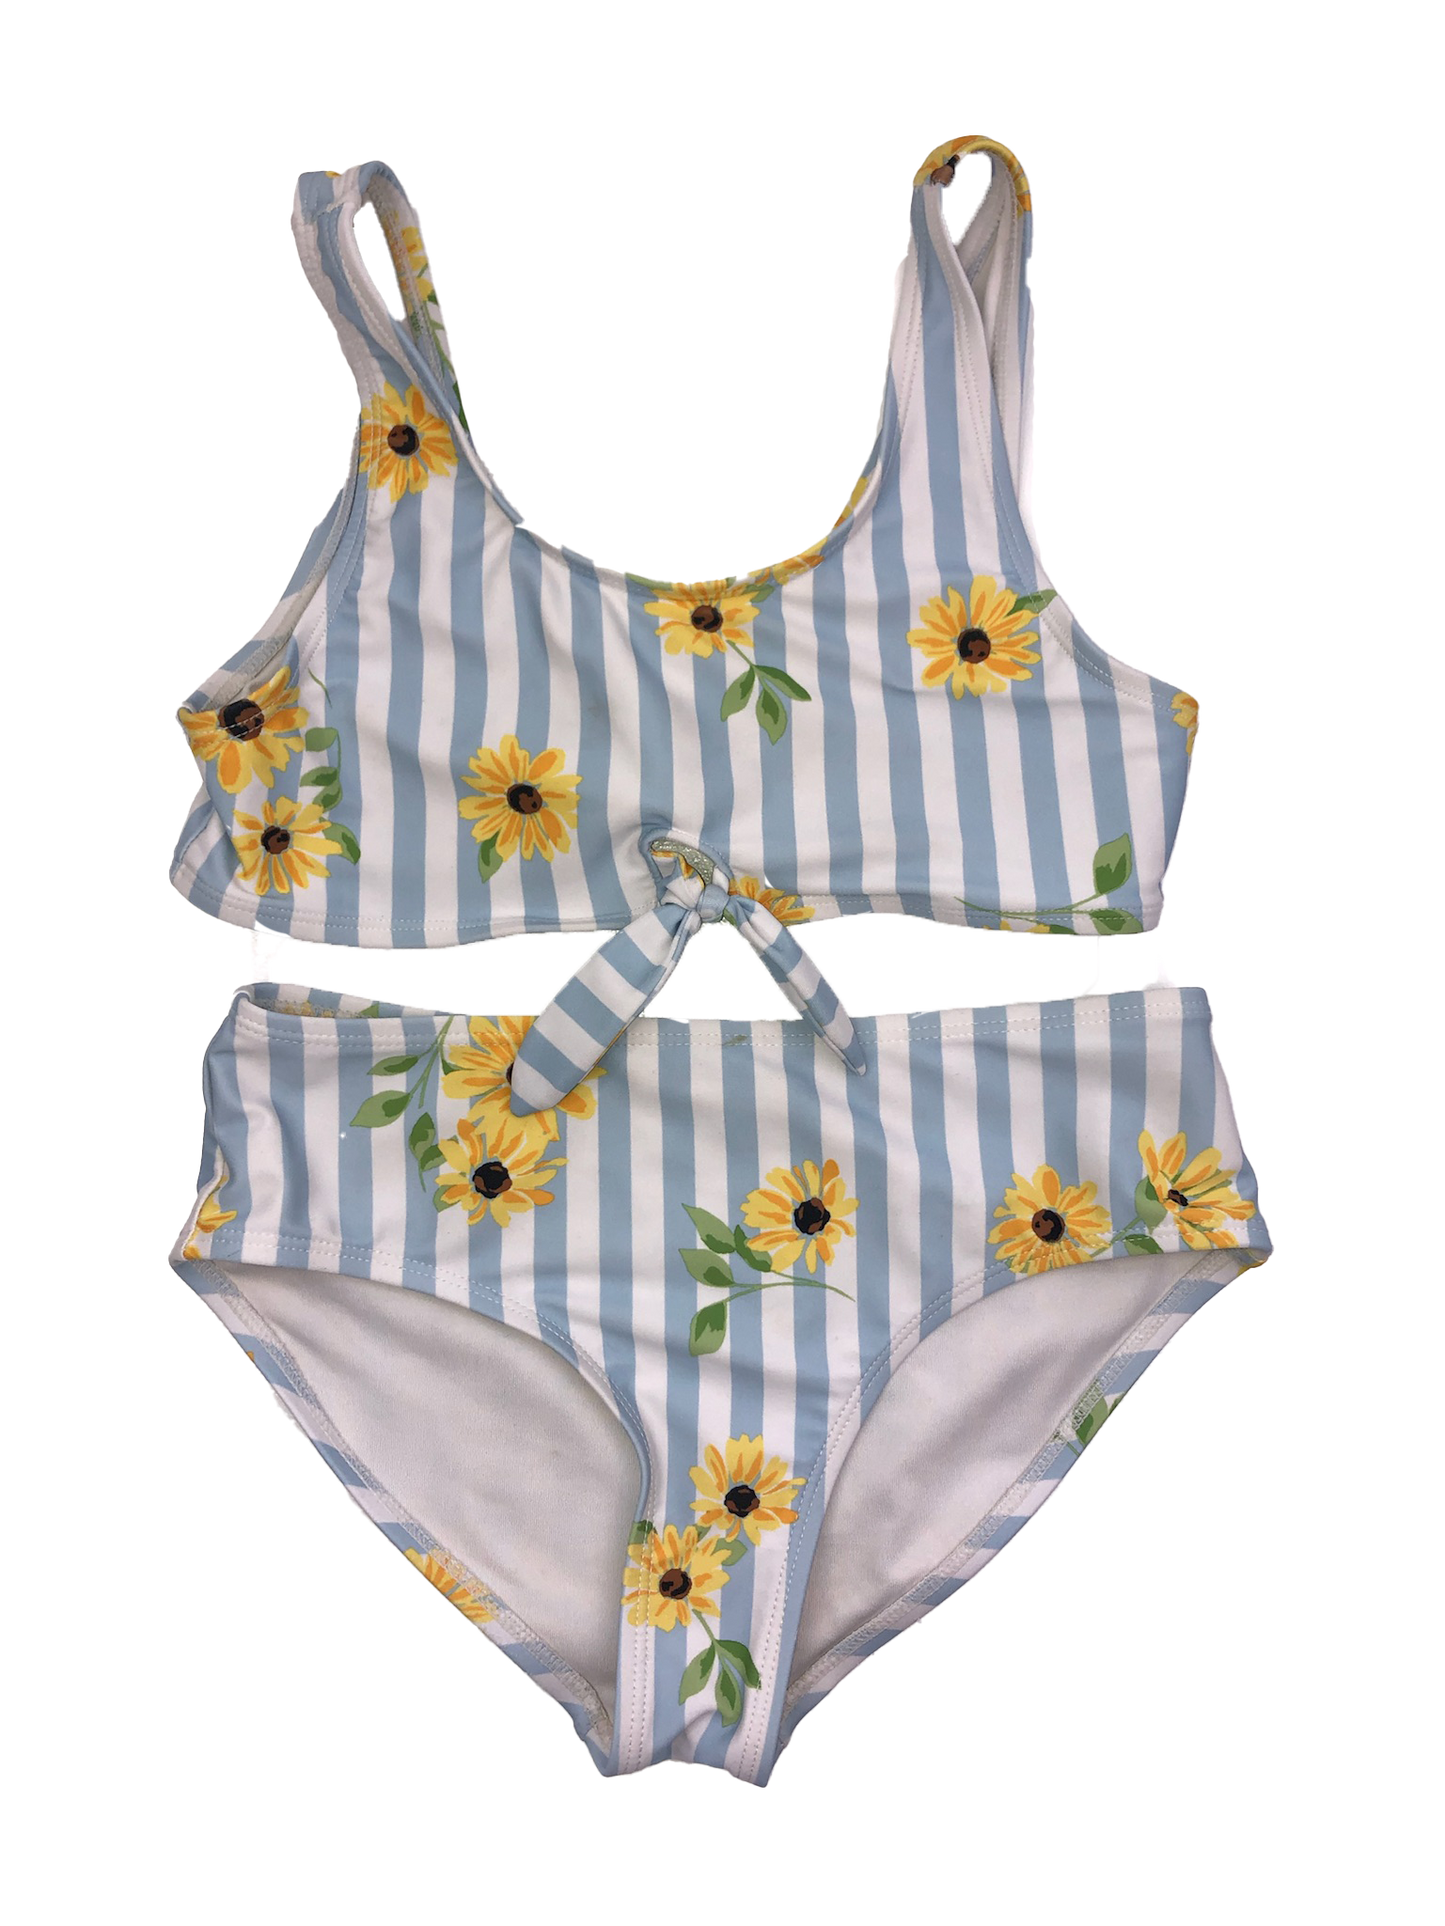 Old Navy Blue & White Striped Bikini with Flowers 10-12